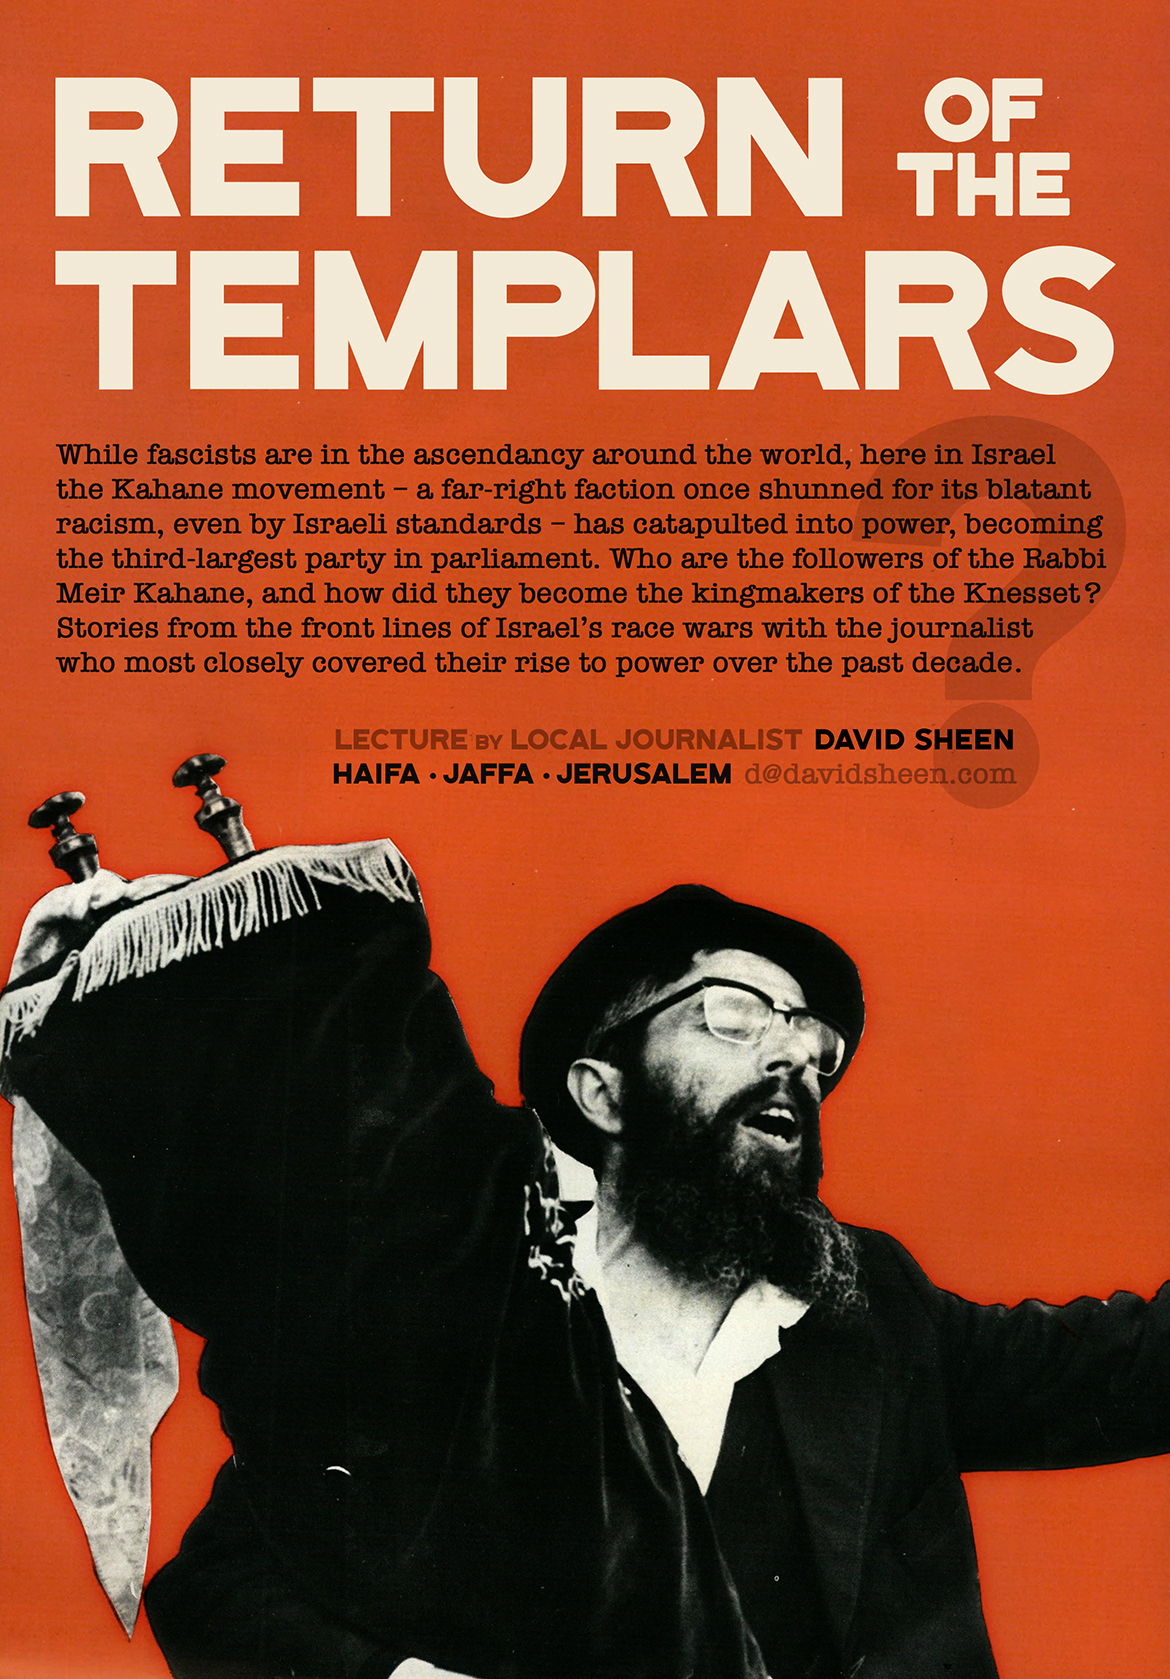 RETURN OF THE TEMPLARS: While fascists are in the ascendancy around the world, in Israel the Kahane movement - a far-right faction once shunned for its blatant racism, even by Israeli standards - has been catapulted into power, becoming the third-largest party in parliament. Who are these followers of arch-racist Rabbi Meir Kahane, and how did they become the kingmakers of the Knesset? Stories from the front lines of Israel's race wars, with the journalist who most closely covered their rise to power over the past decade, David Sheen davidsheen.com